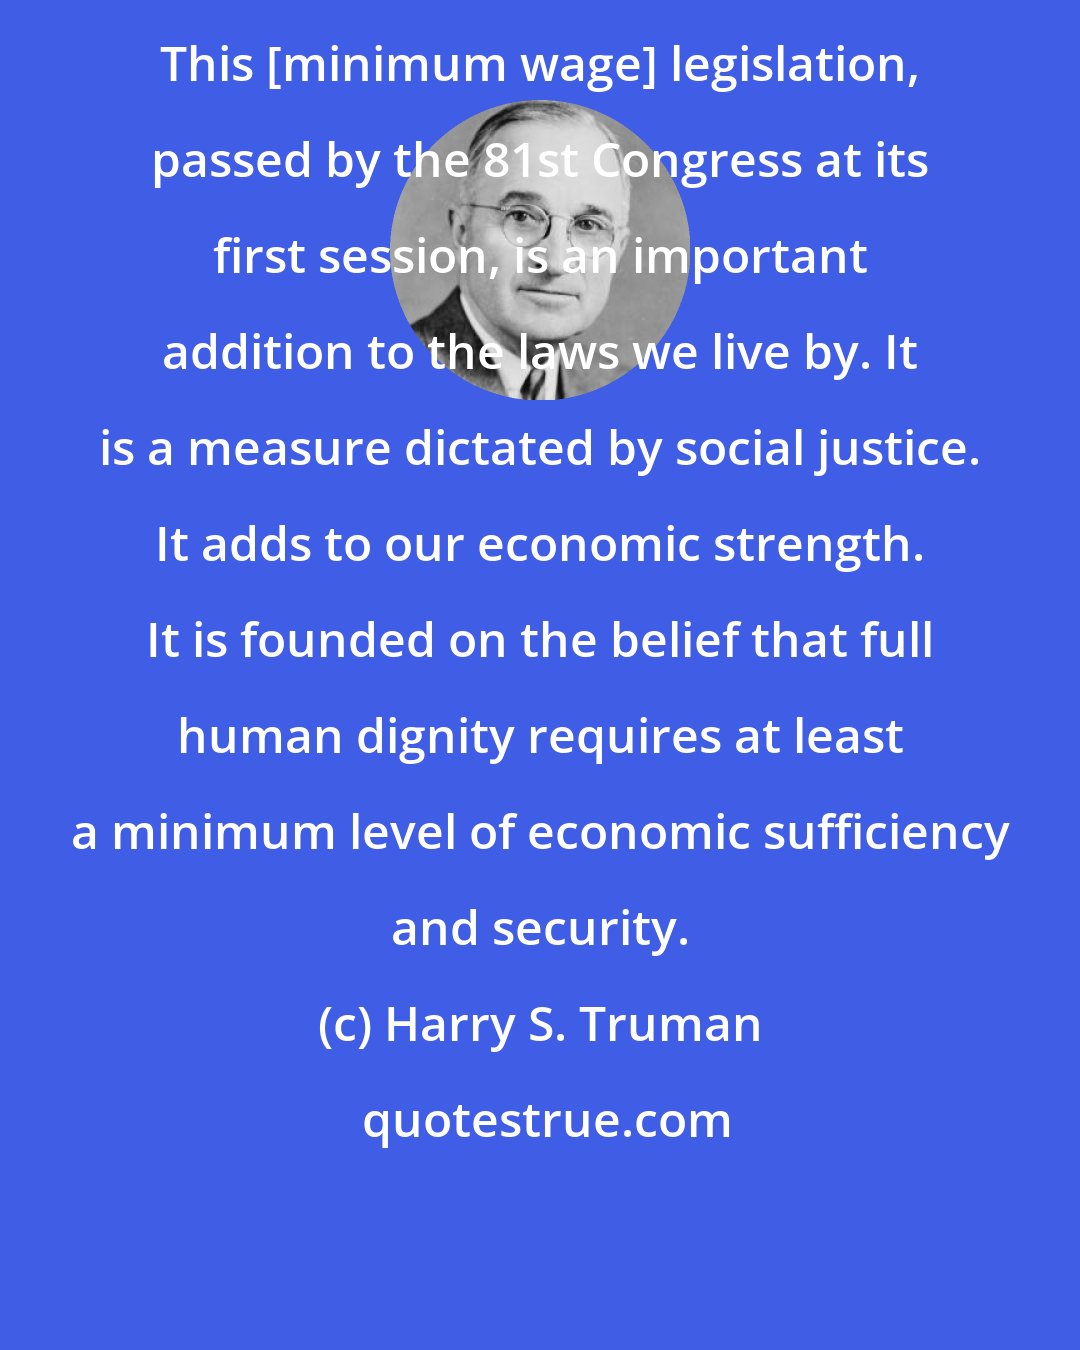 Harry S. Truman: This [minimum wage] legislation, passed by the 81st Congress at its first session, is an important addition to the laws we live by. It is a measure dictated by social justice. It adds to our economic strength. It is founded on the belief that full human dignity requires at least a minimum level of economic sufficiency and security.